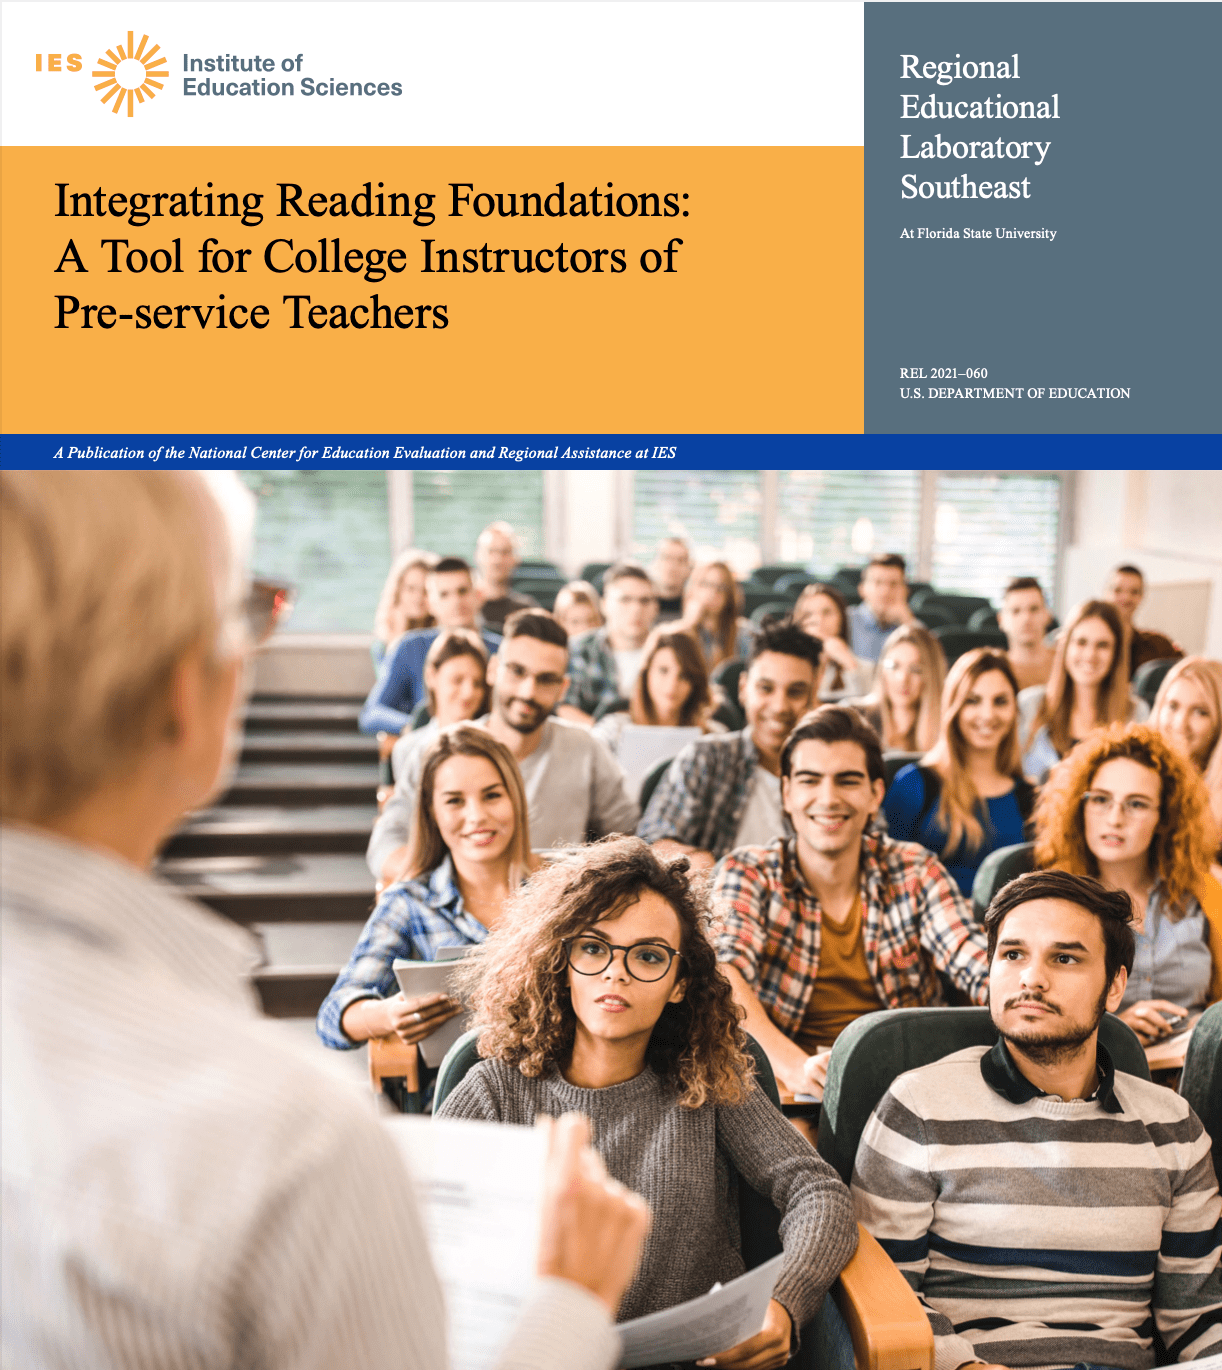 Cover of toolkit shows college students in lecture hall.